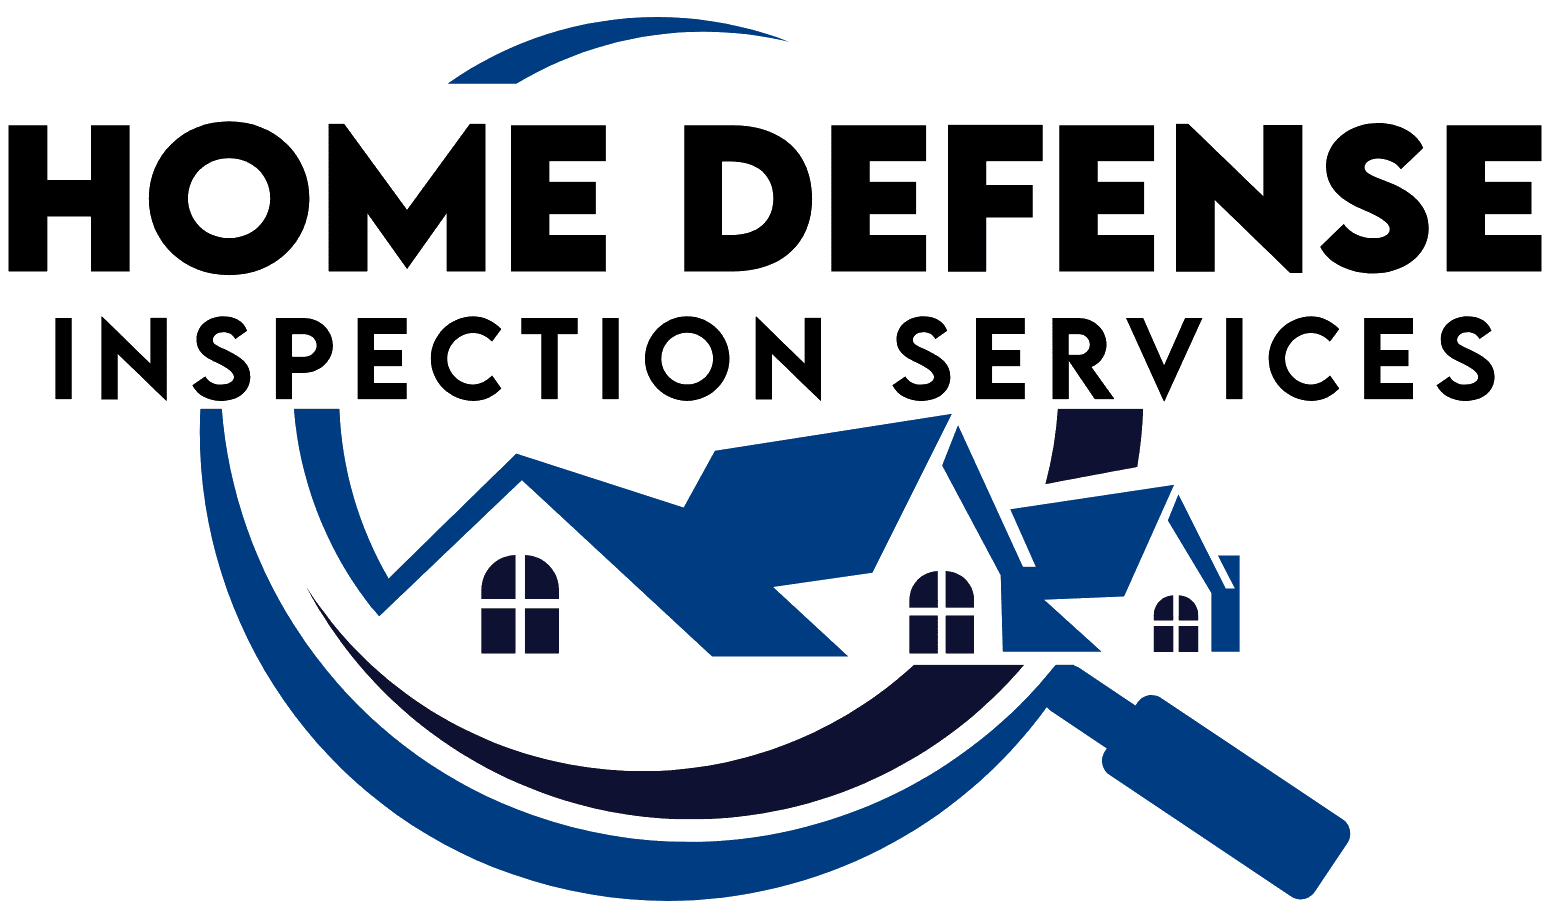 Home Defense Inspection Services LLC